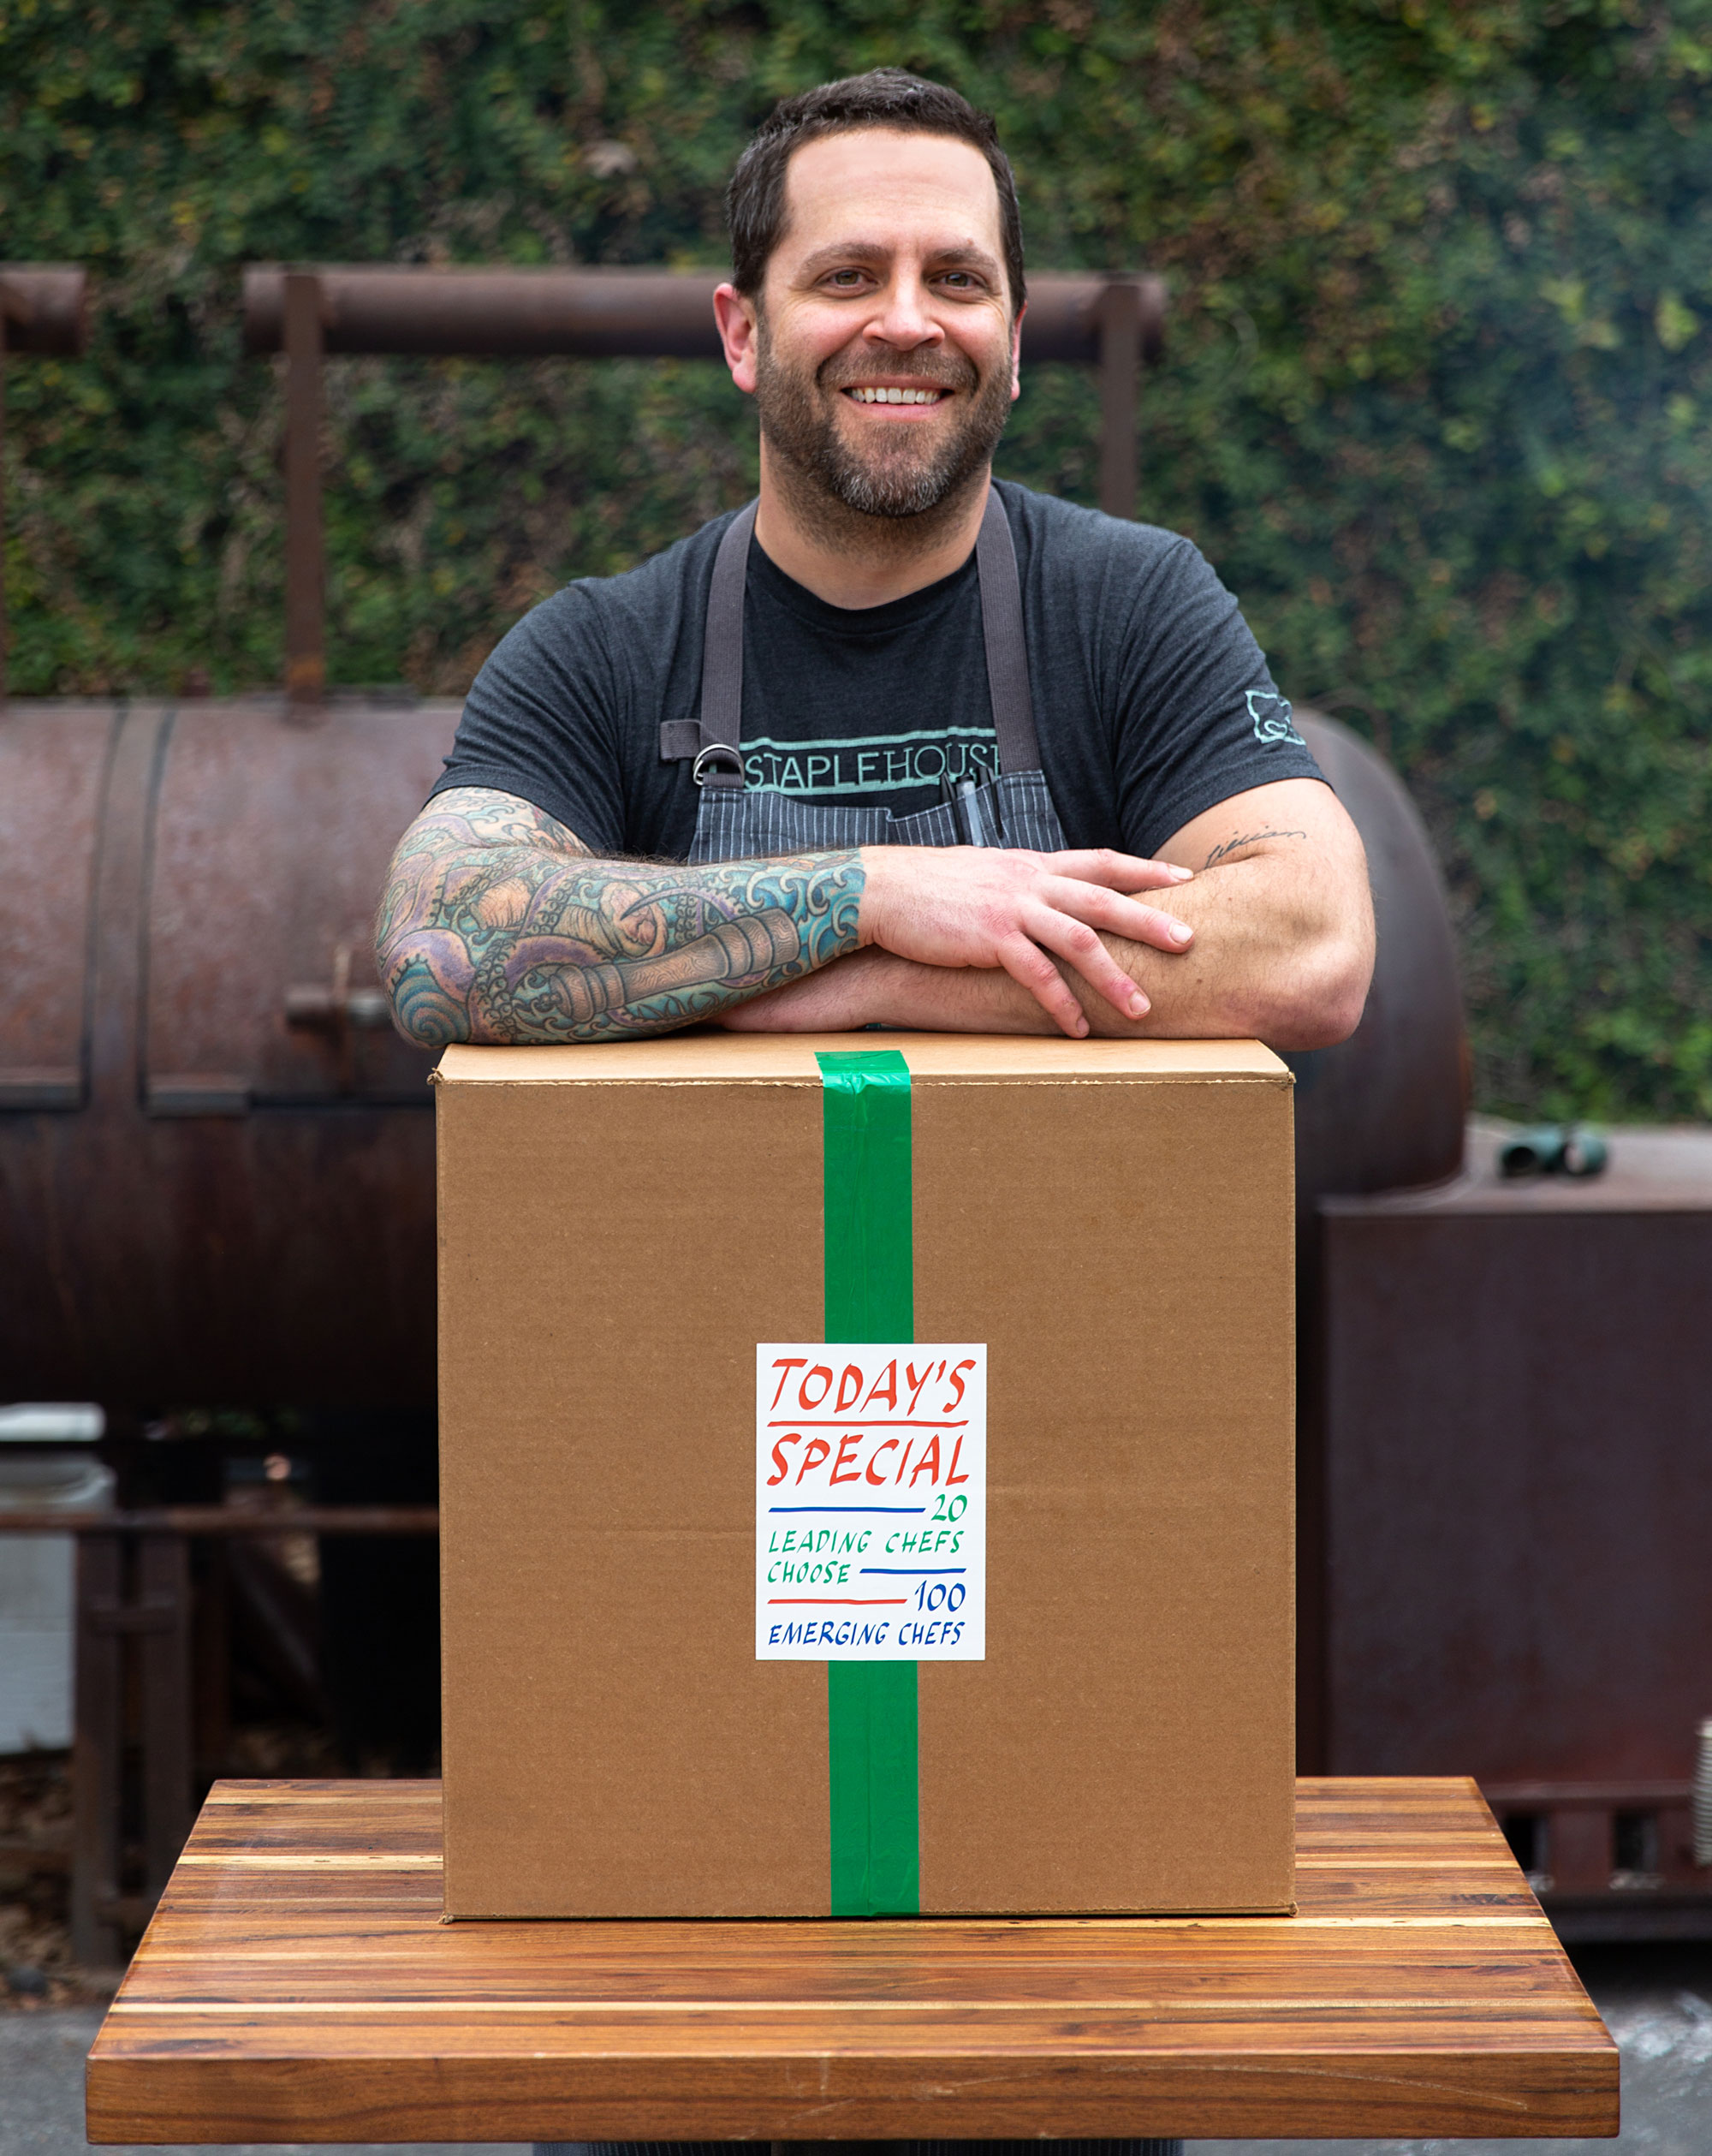 Chef Ryan Smith with his Today's Special meal kit box